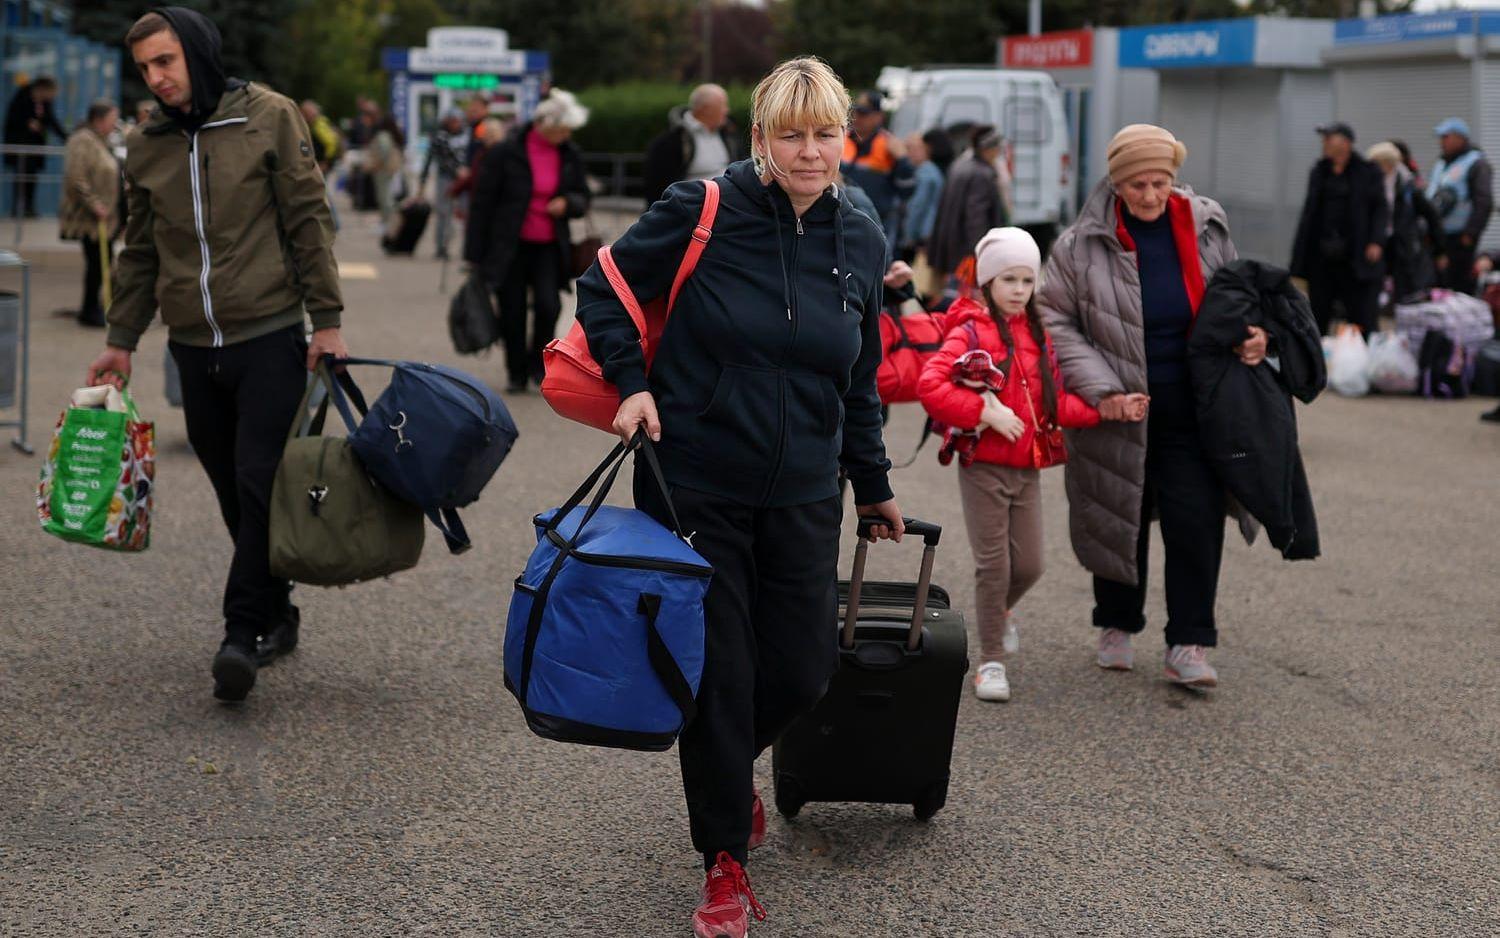 Evacuees from Kherson gather upon their arrival at the railway station in Anapa, southern Russia, Tuesday, Oct. 25, 2022. Russian authorities have encouraged residents of Kherson to evacuate, warning that the city may come under massive Ukrainian shelling. (AP Photo)  XAZ124